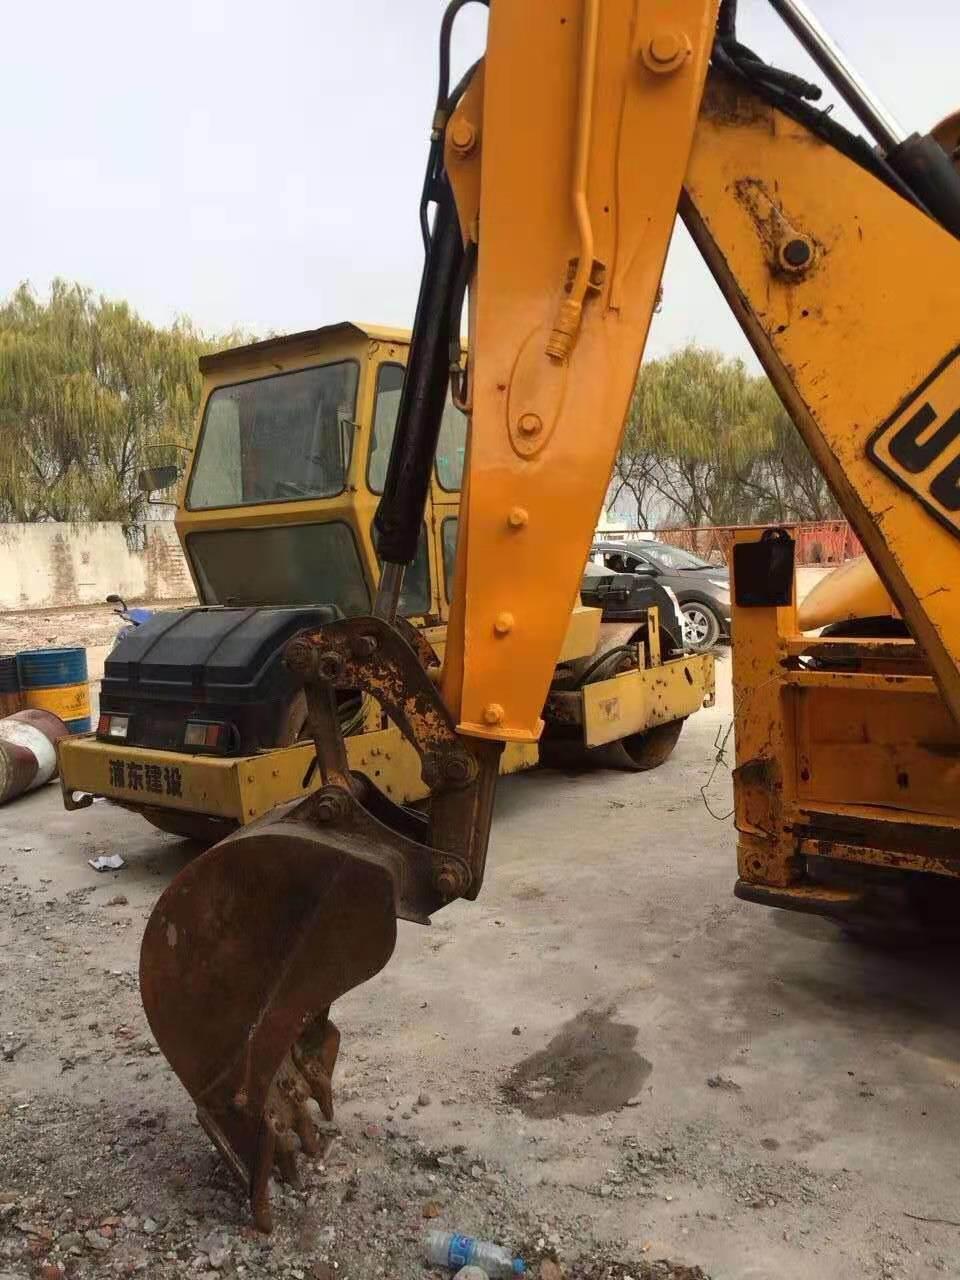 on Promotion Original Jcb 3cx Backhoe Loader with Good Condition and Price